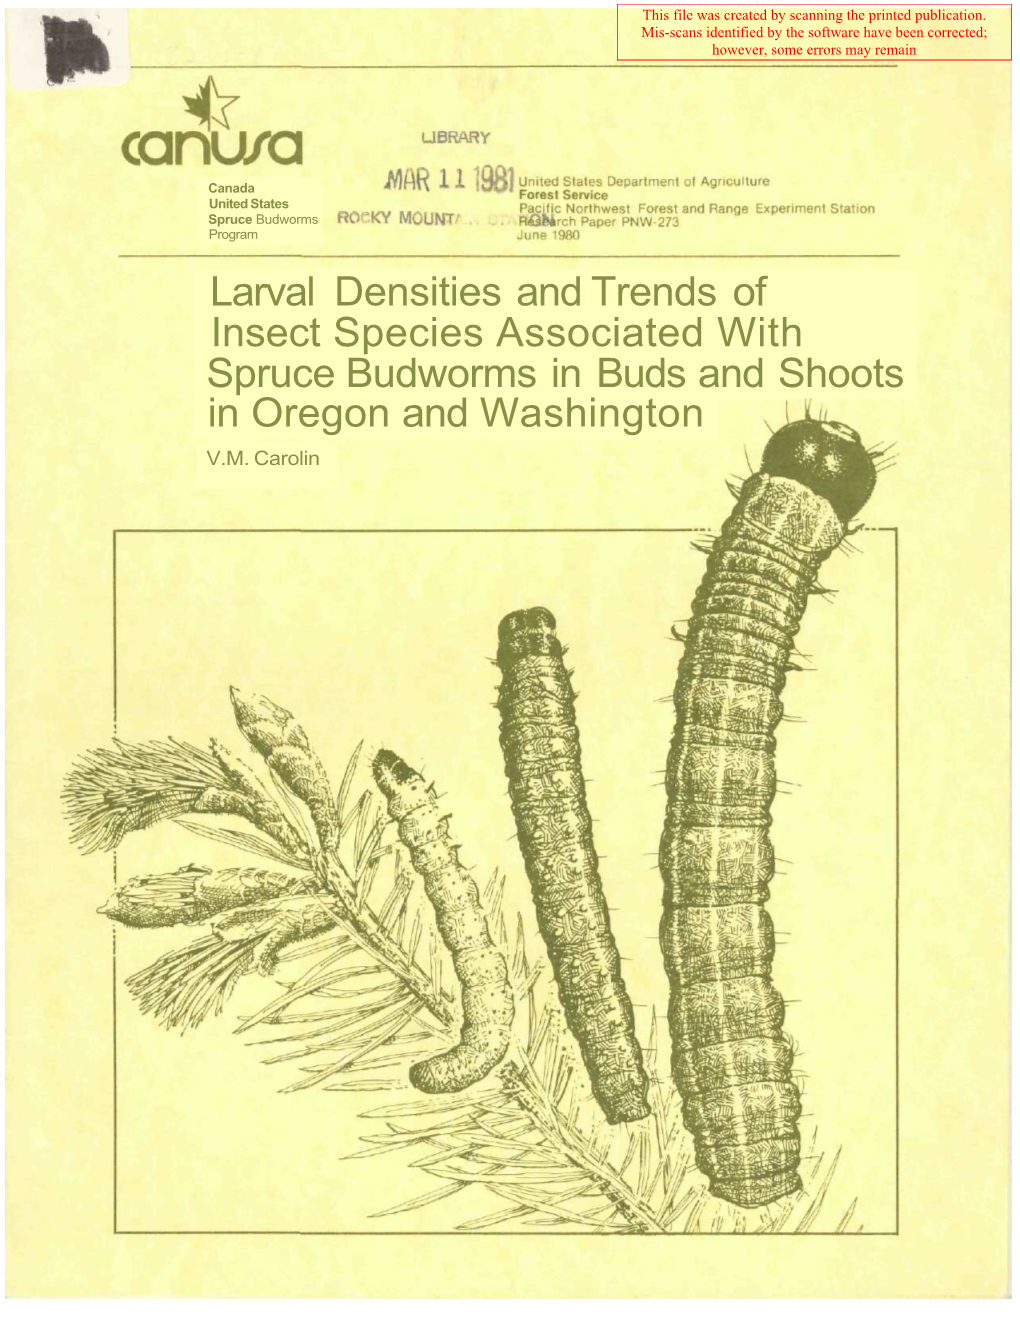 Larval Densities and Trends of Insect Species Associated with Spruce Budworms in Buds and Shoots in Oregon and Washington V.M